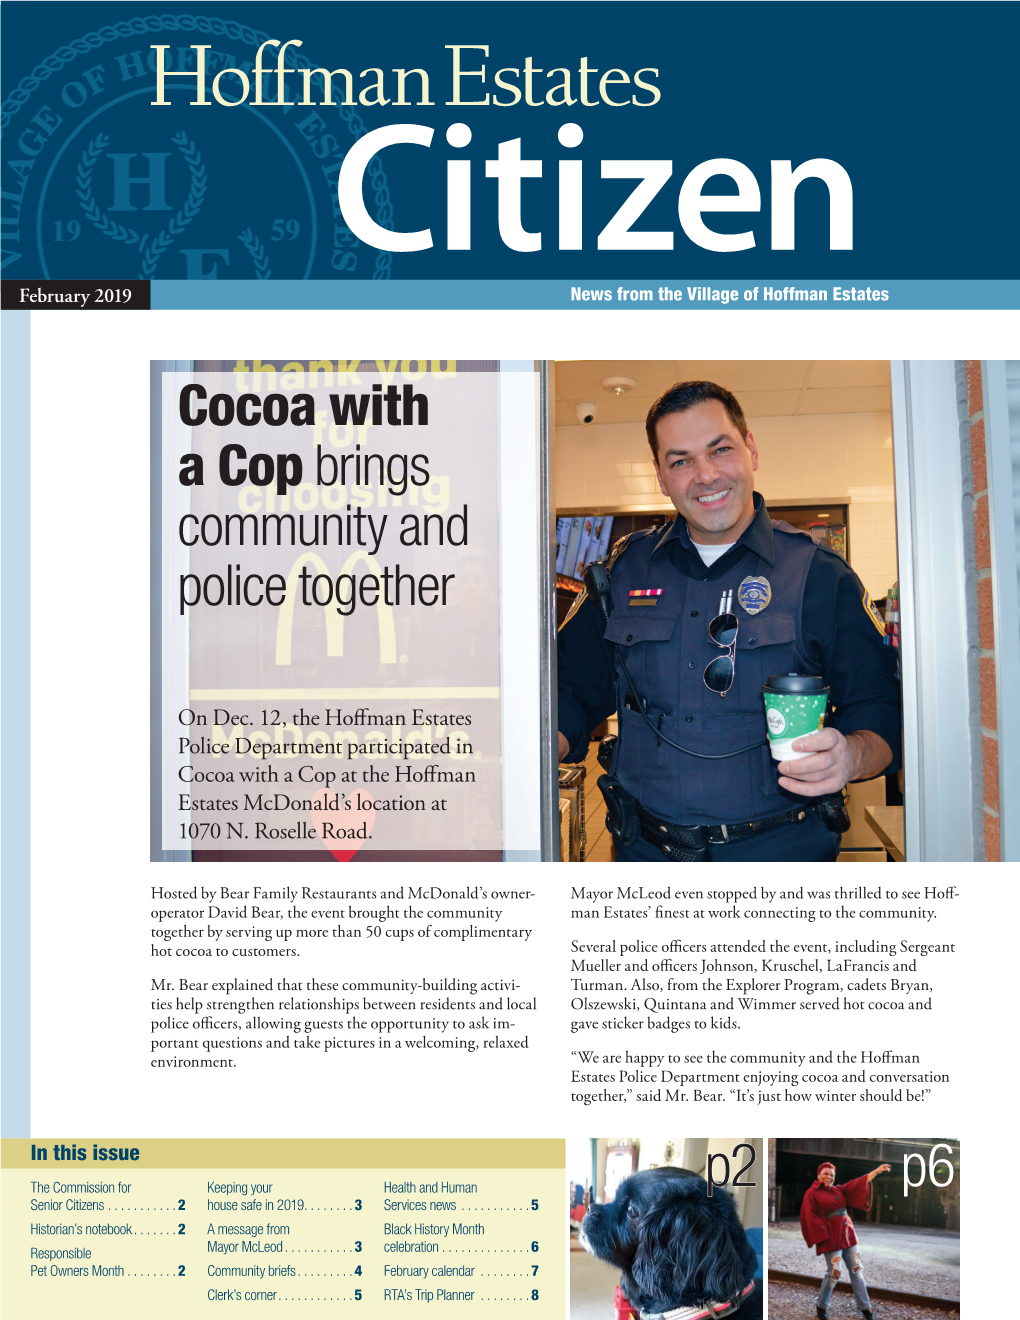 Cocoa with a Cop Brings Community and Police Together